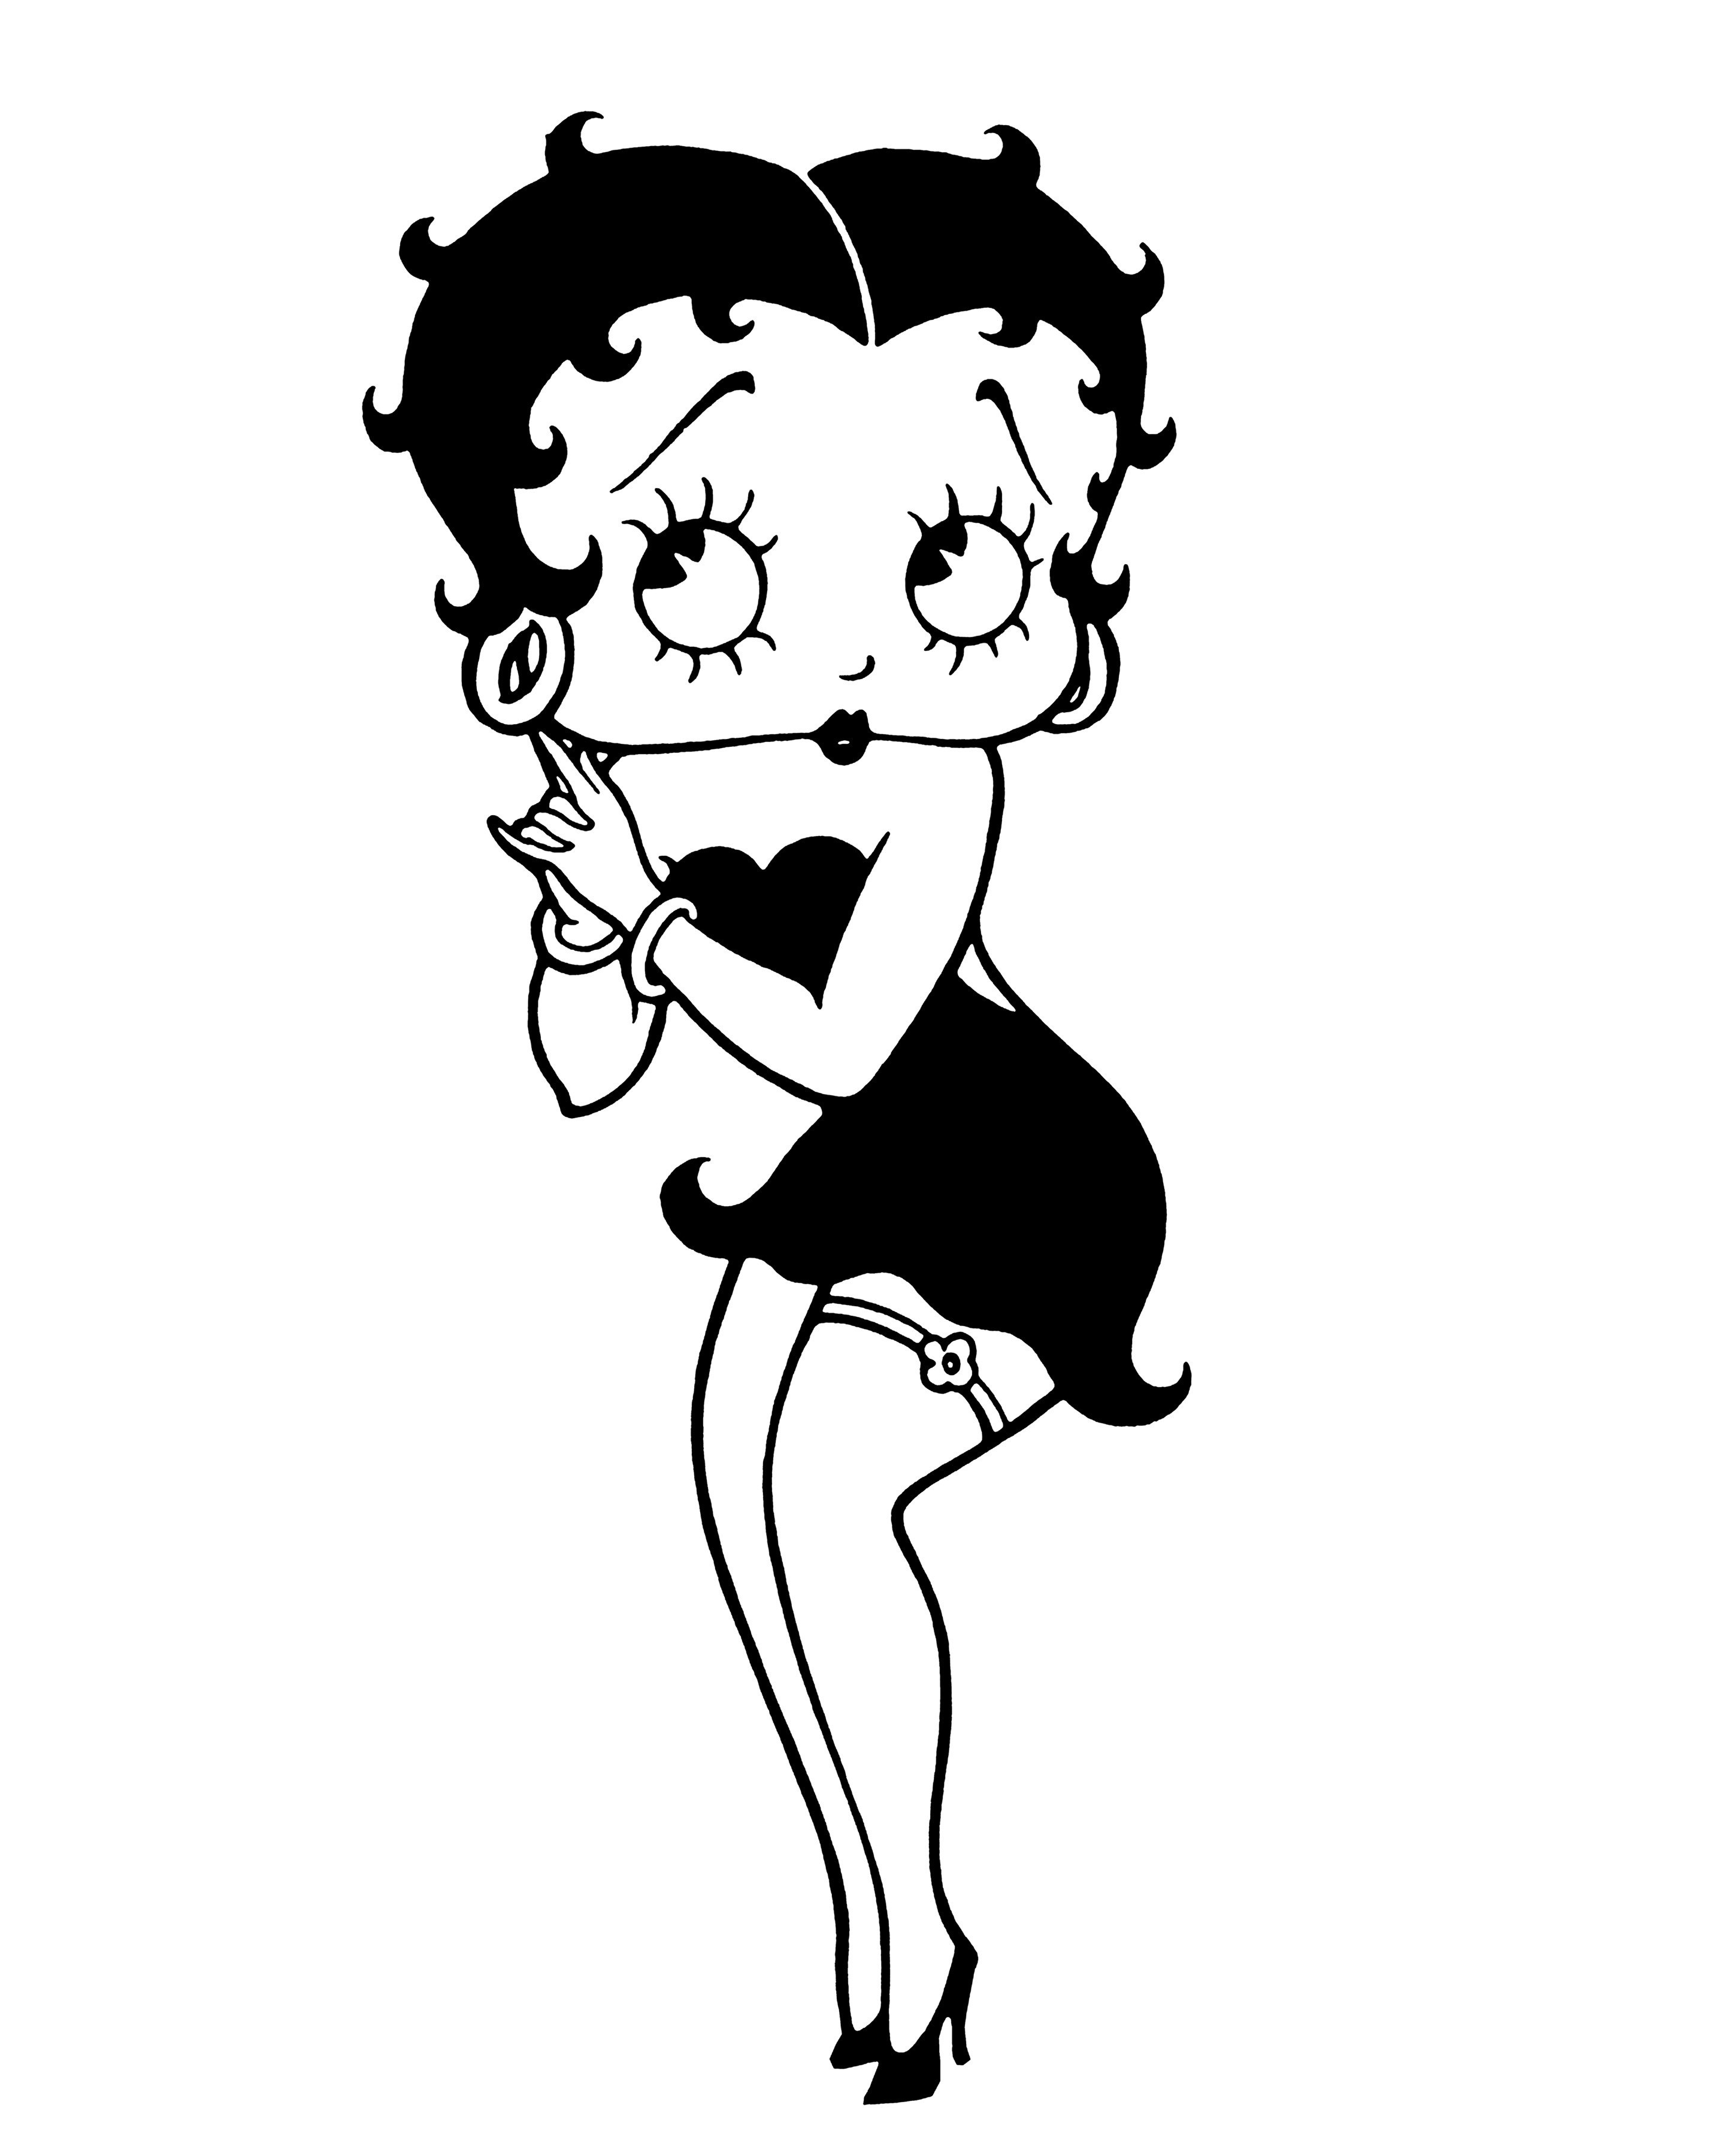 betty boop television show